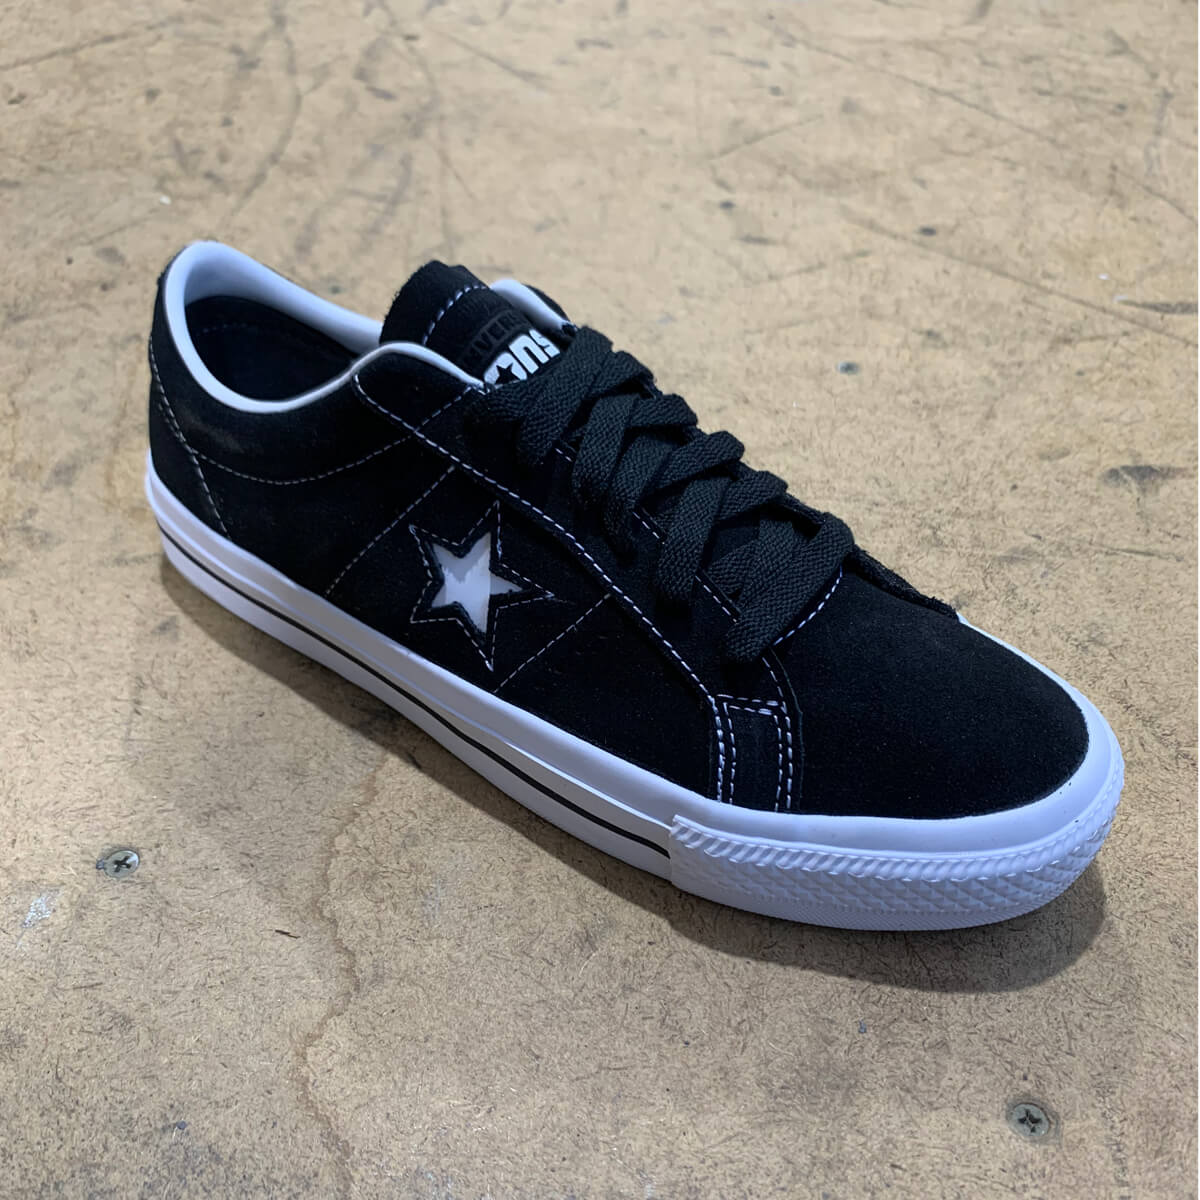 30% OFF Converse One Pro Low at Daily Grind shop